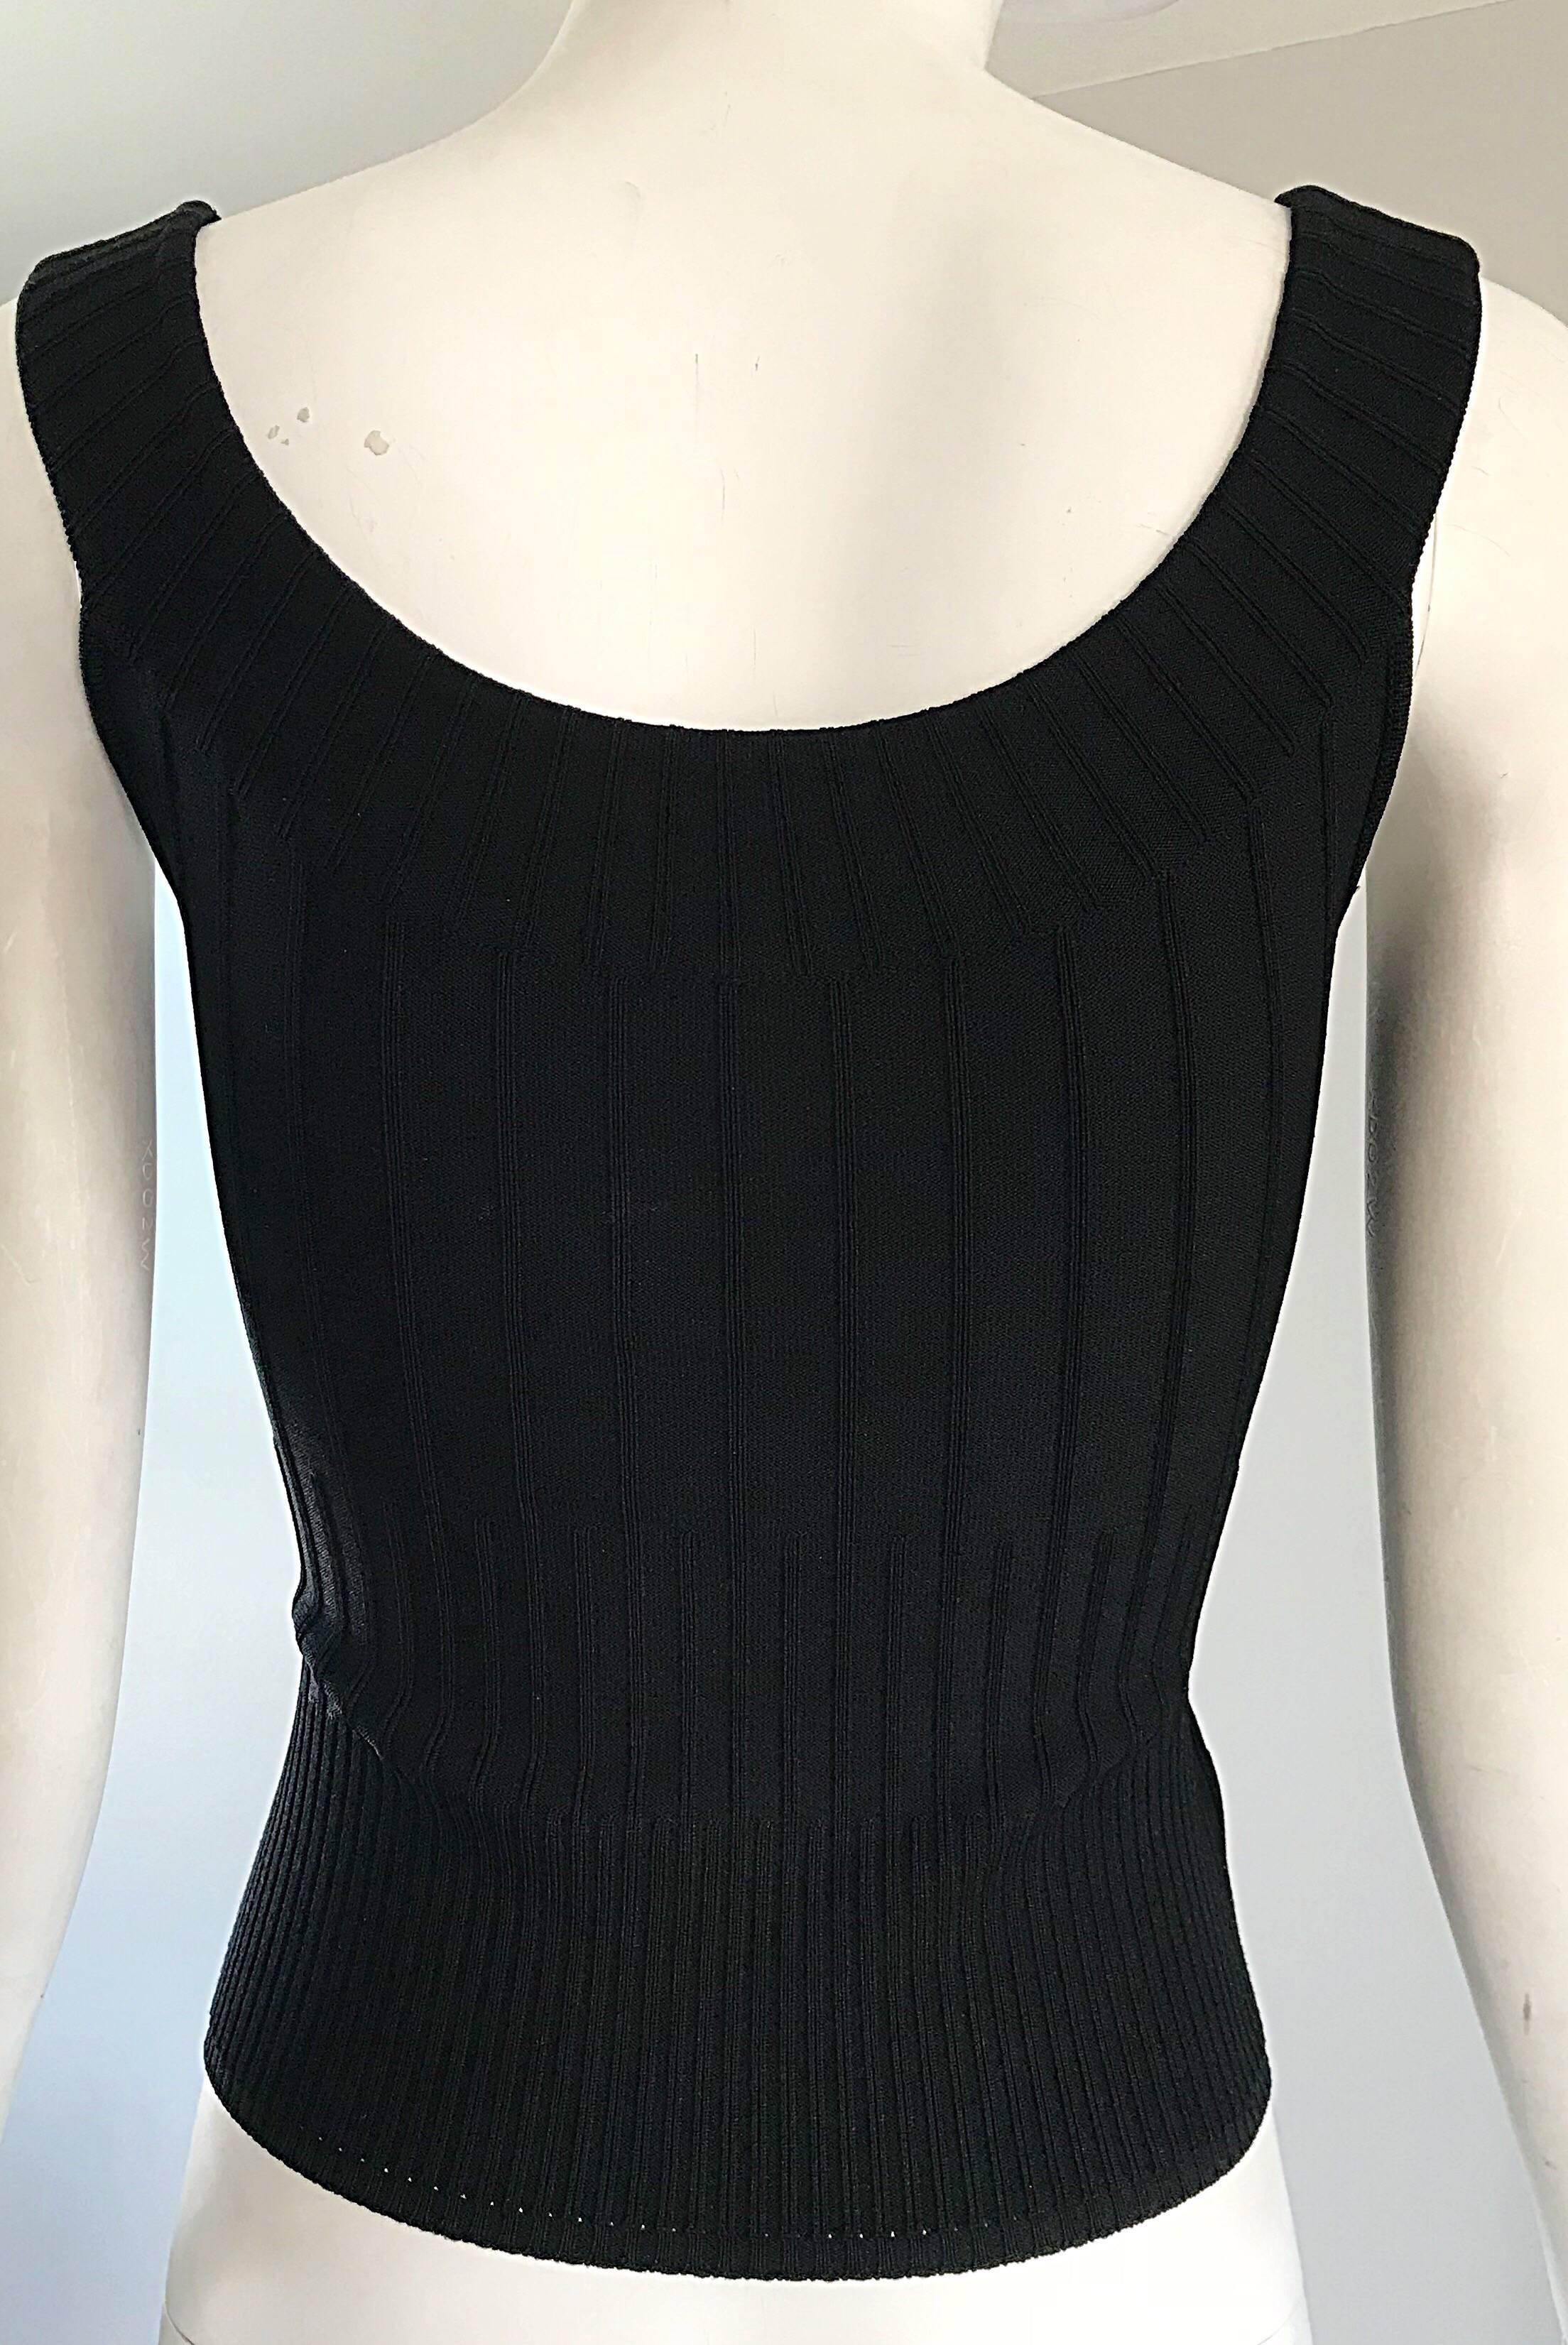 Thierry Mugler Couture 1990s Black Ribbed Sleeveless Vintage 90s Crop Top Shirt For Sale 1